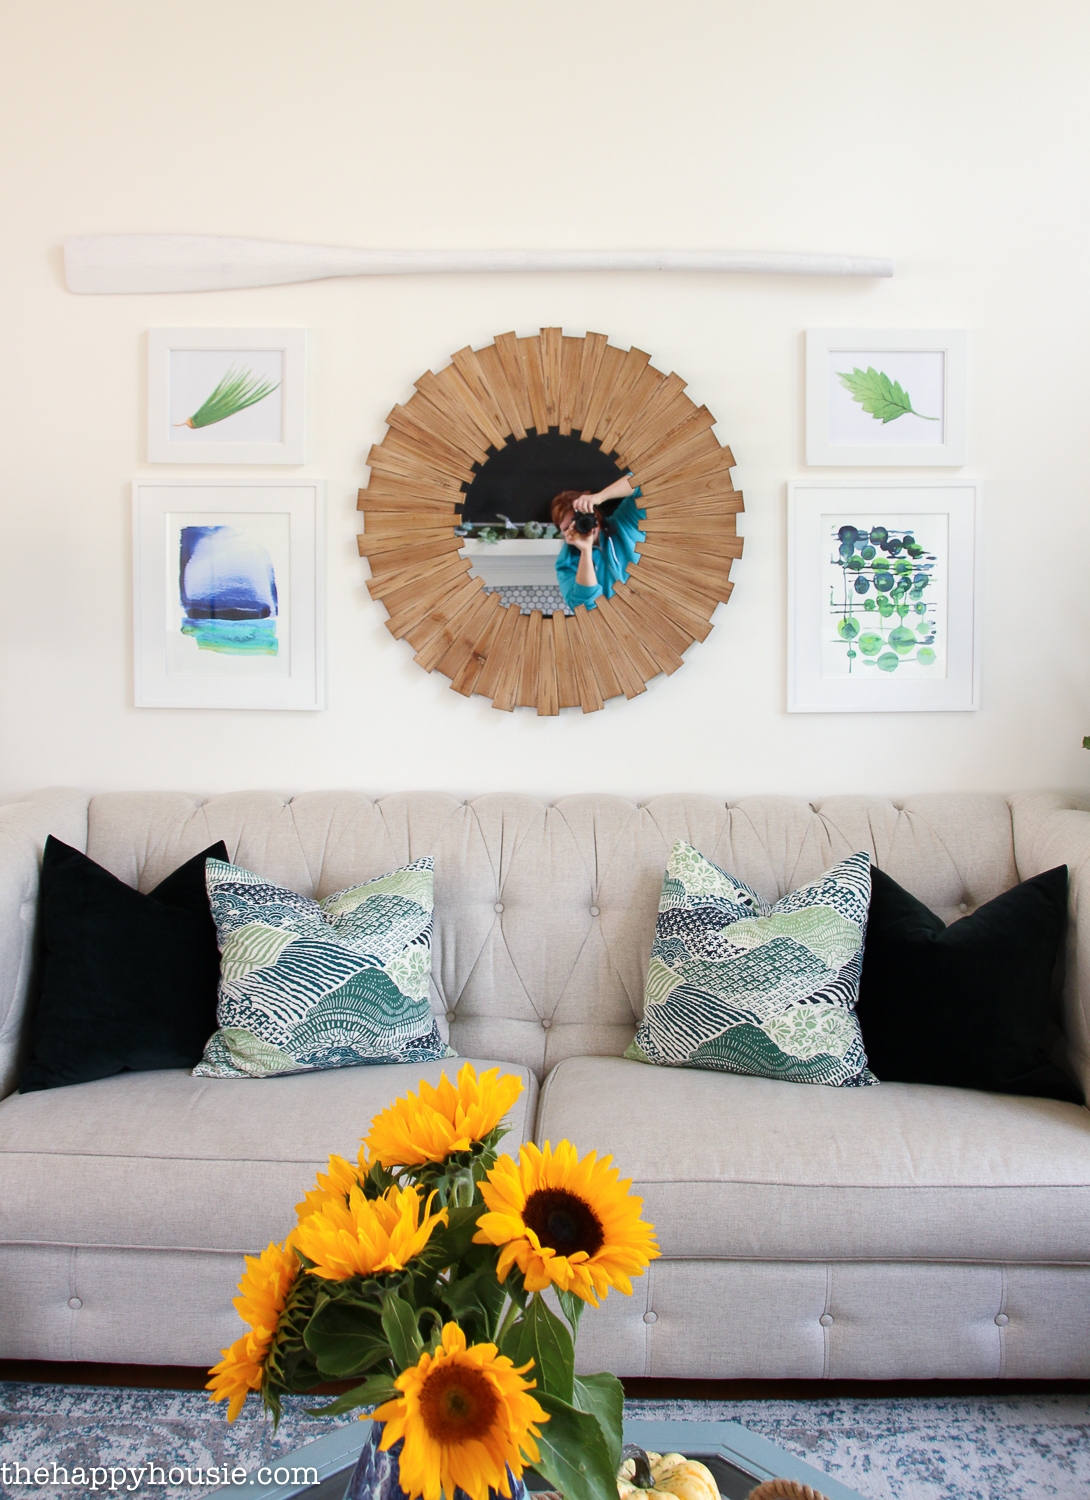 A round wooden mirror above the couch on the wall.